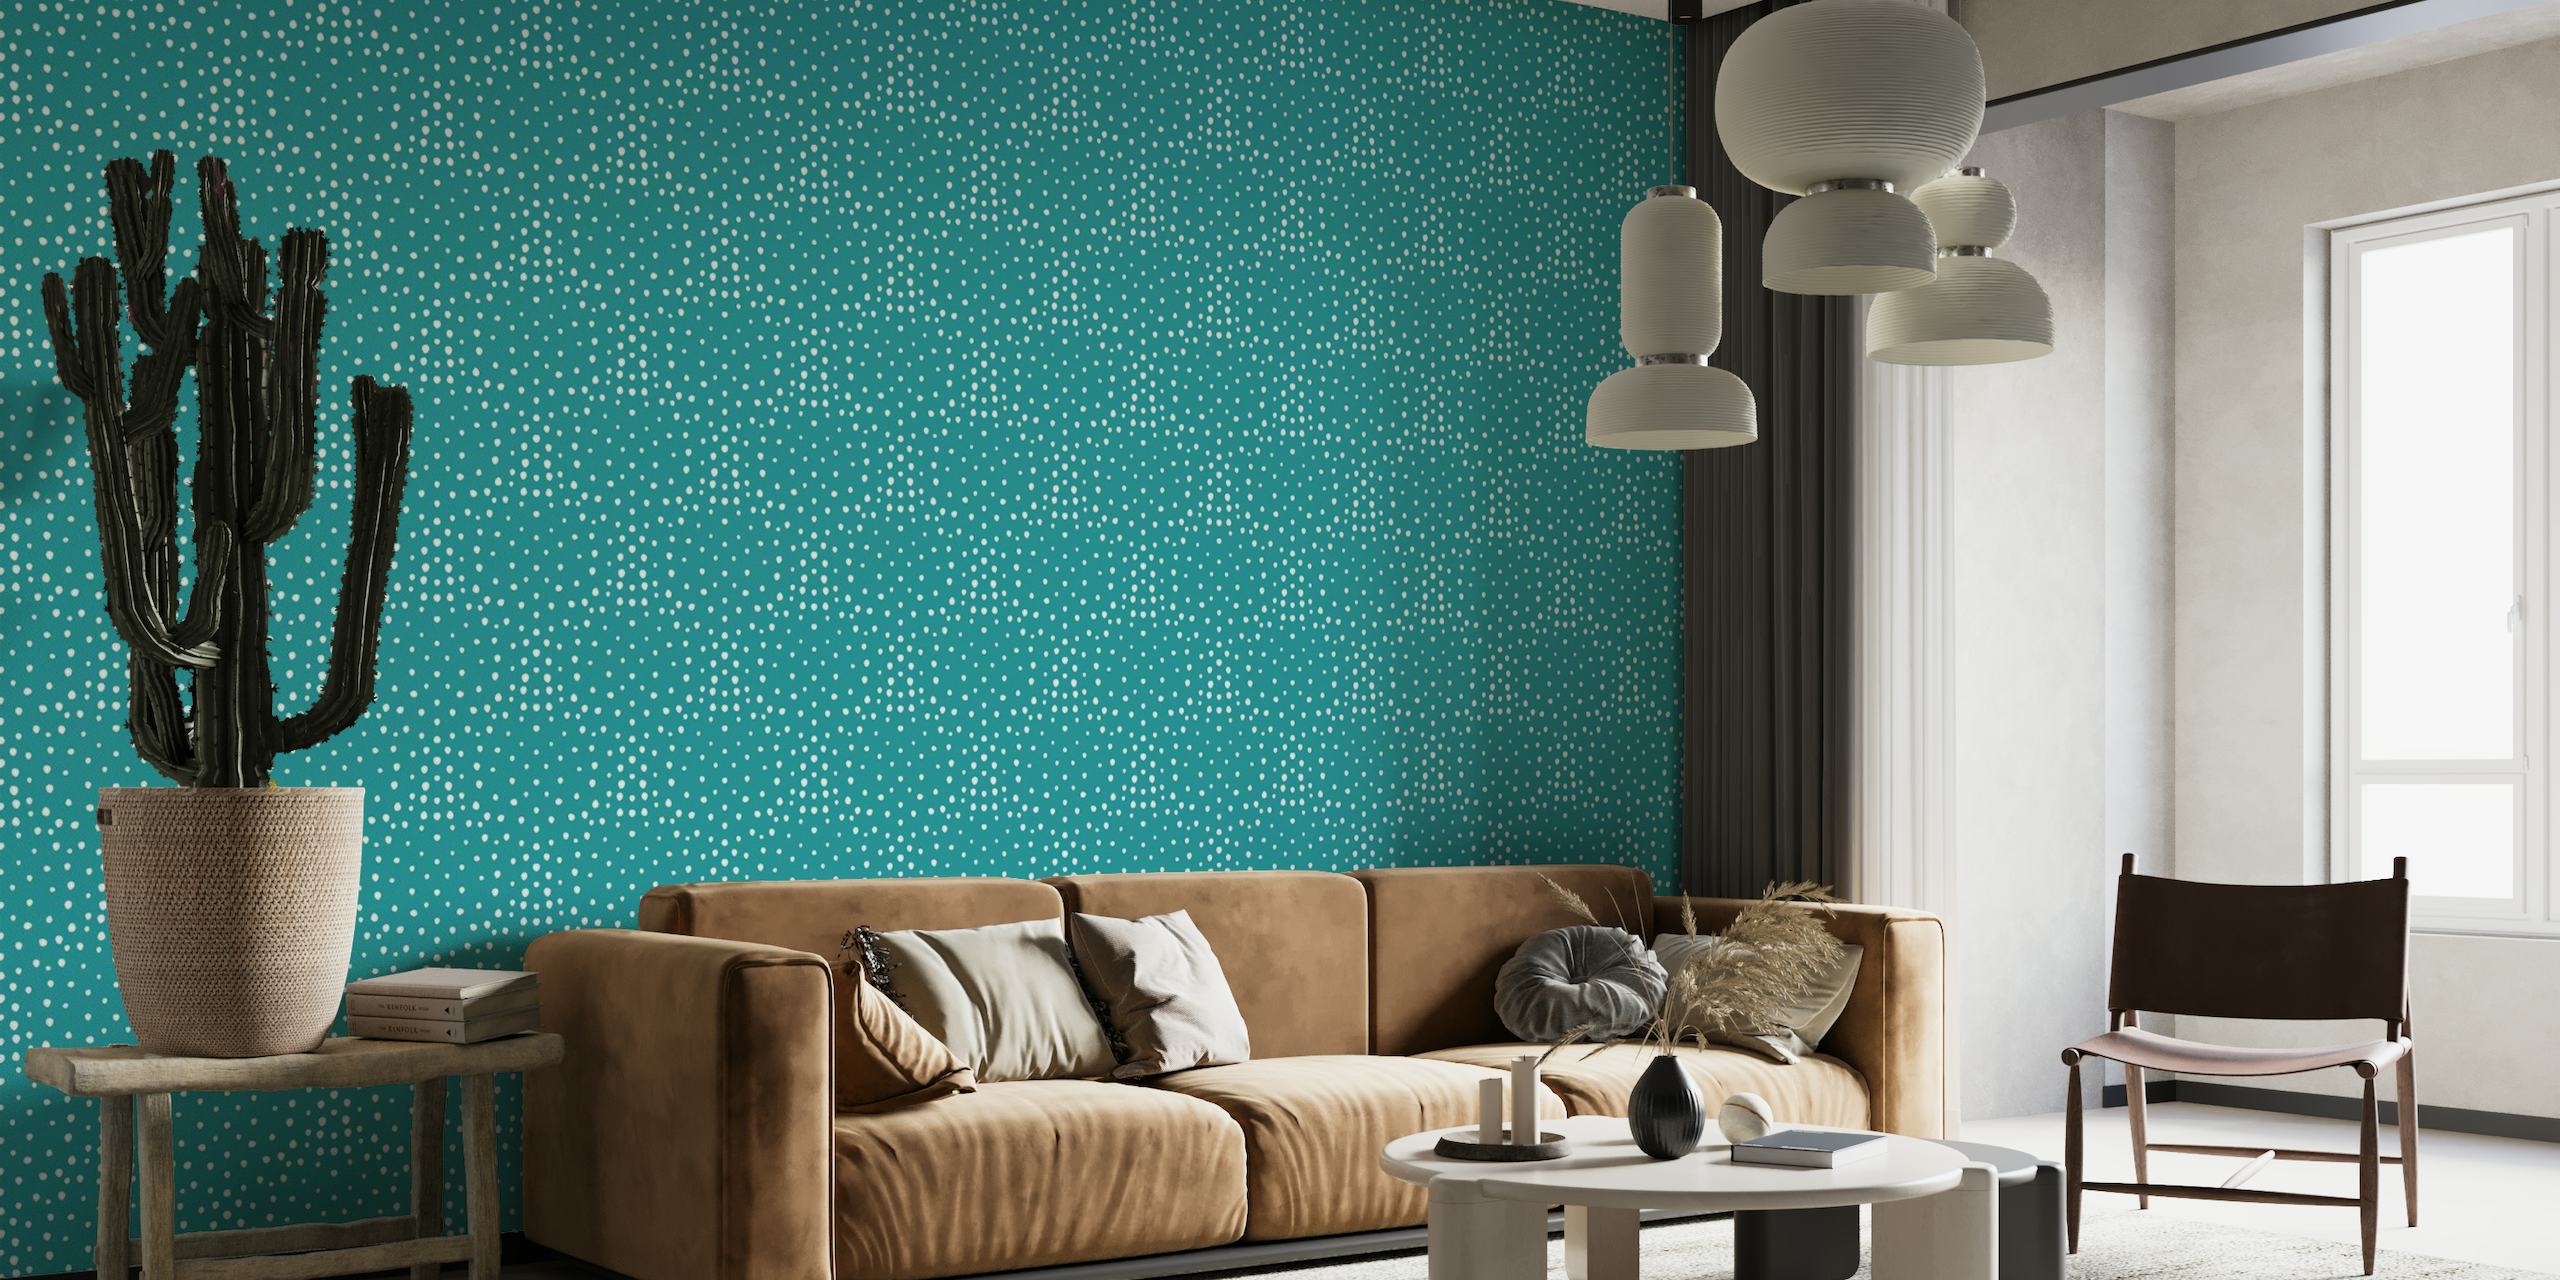 Turquoise Tranquility: Abstract Dots Blender Design - GD23-A17 wallpaper